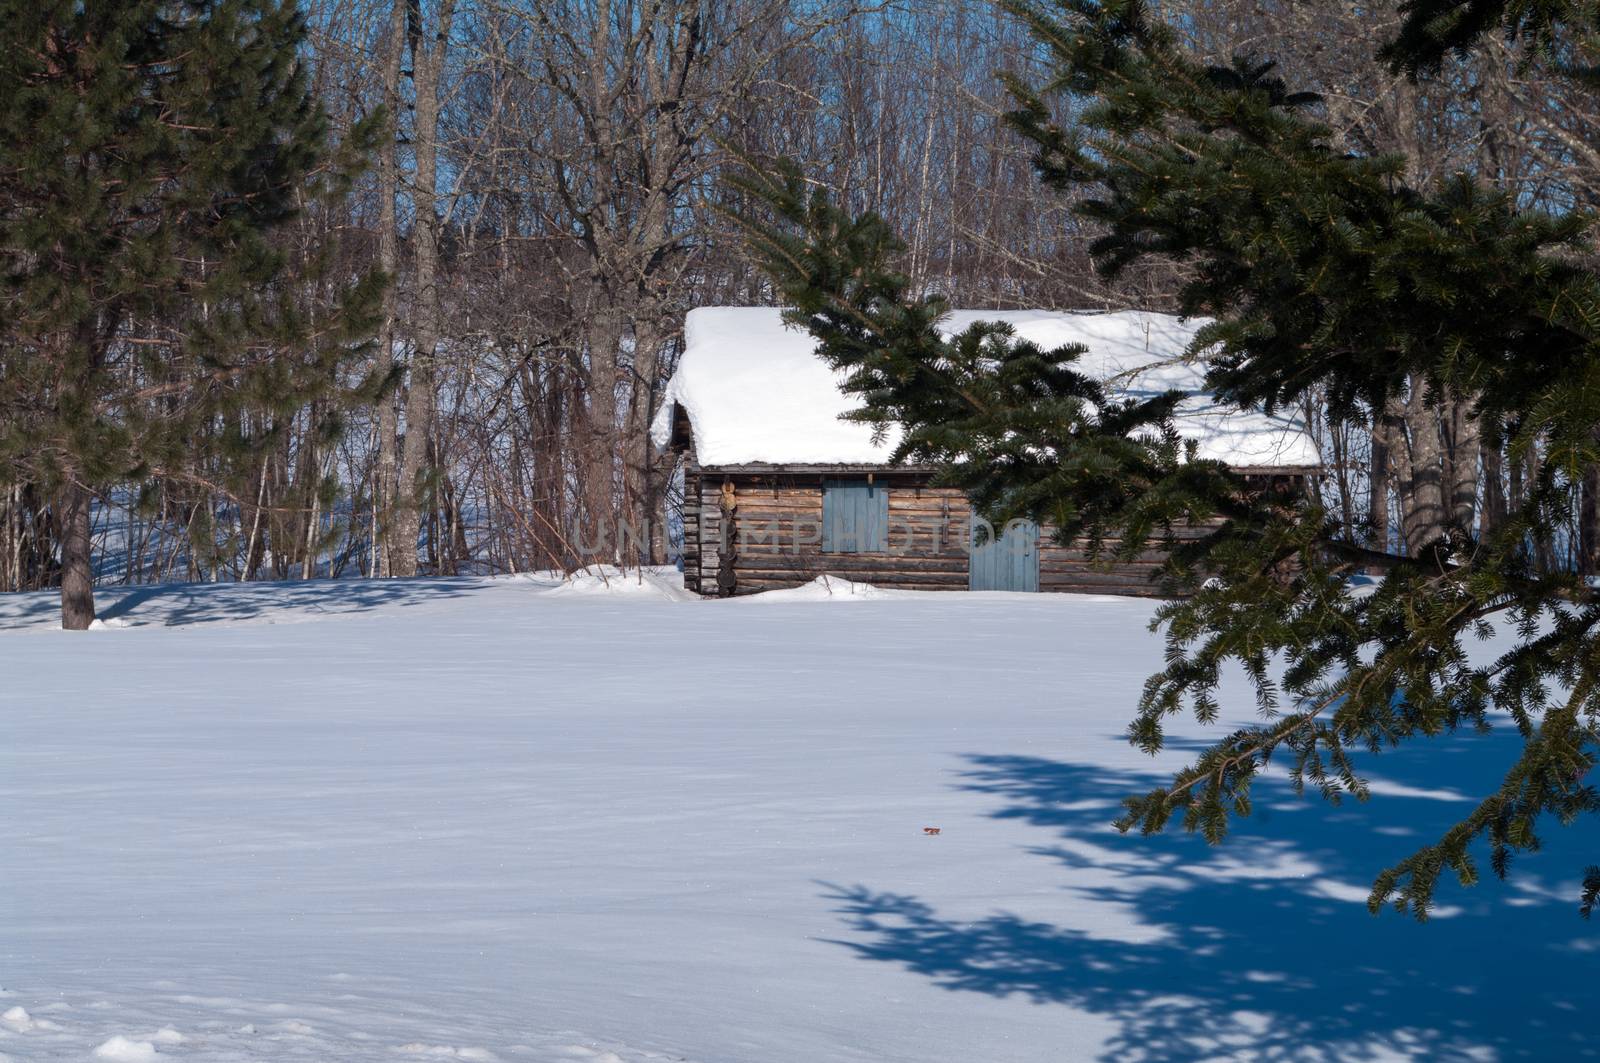 Cabin in hte Spruce trees in the winter 